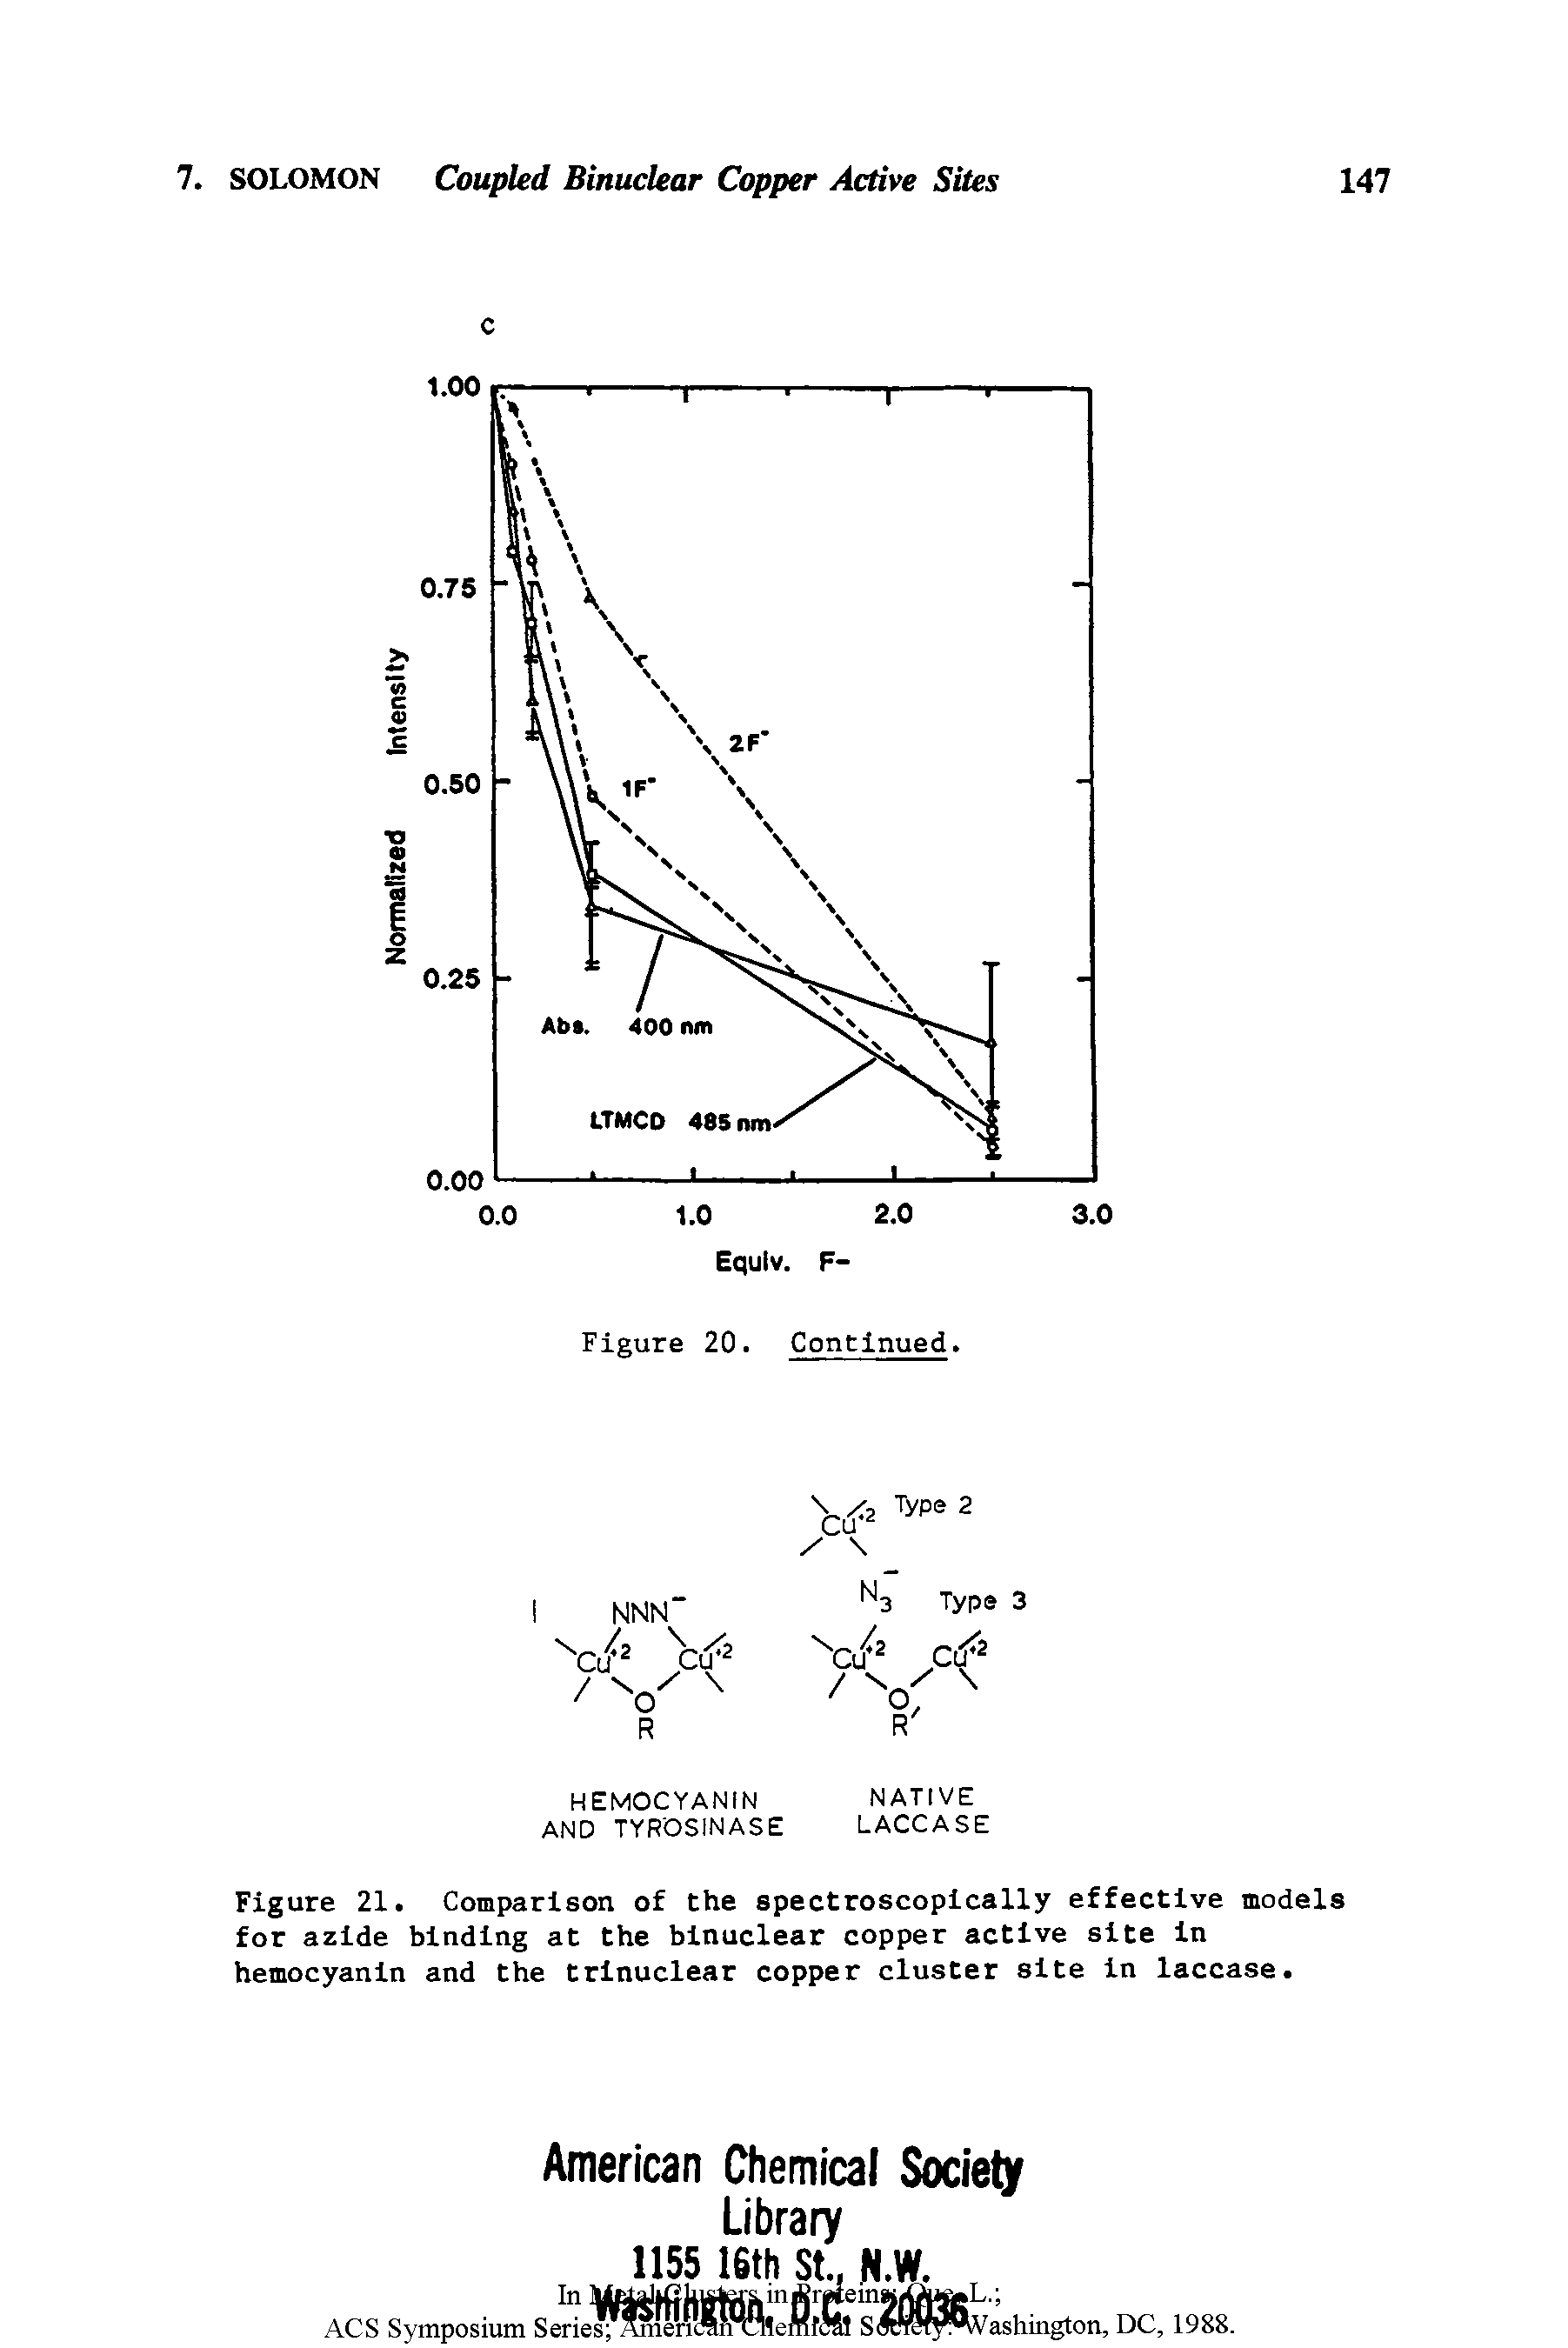 Figure 21. Comparison of the spectroscopically effective models for azide binding at the blnuclear copper active site in hemocyanln and the trlnuclear copper cluster site in laccase.